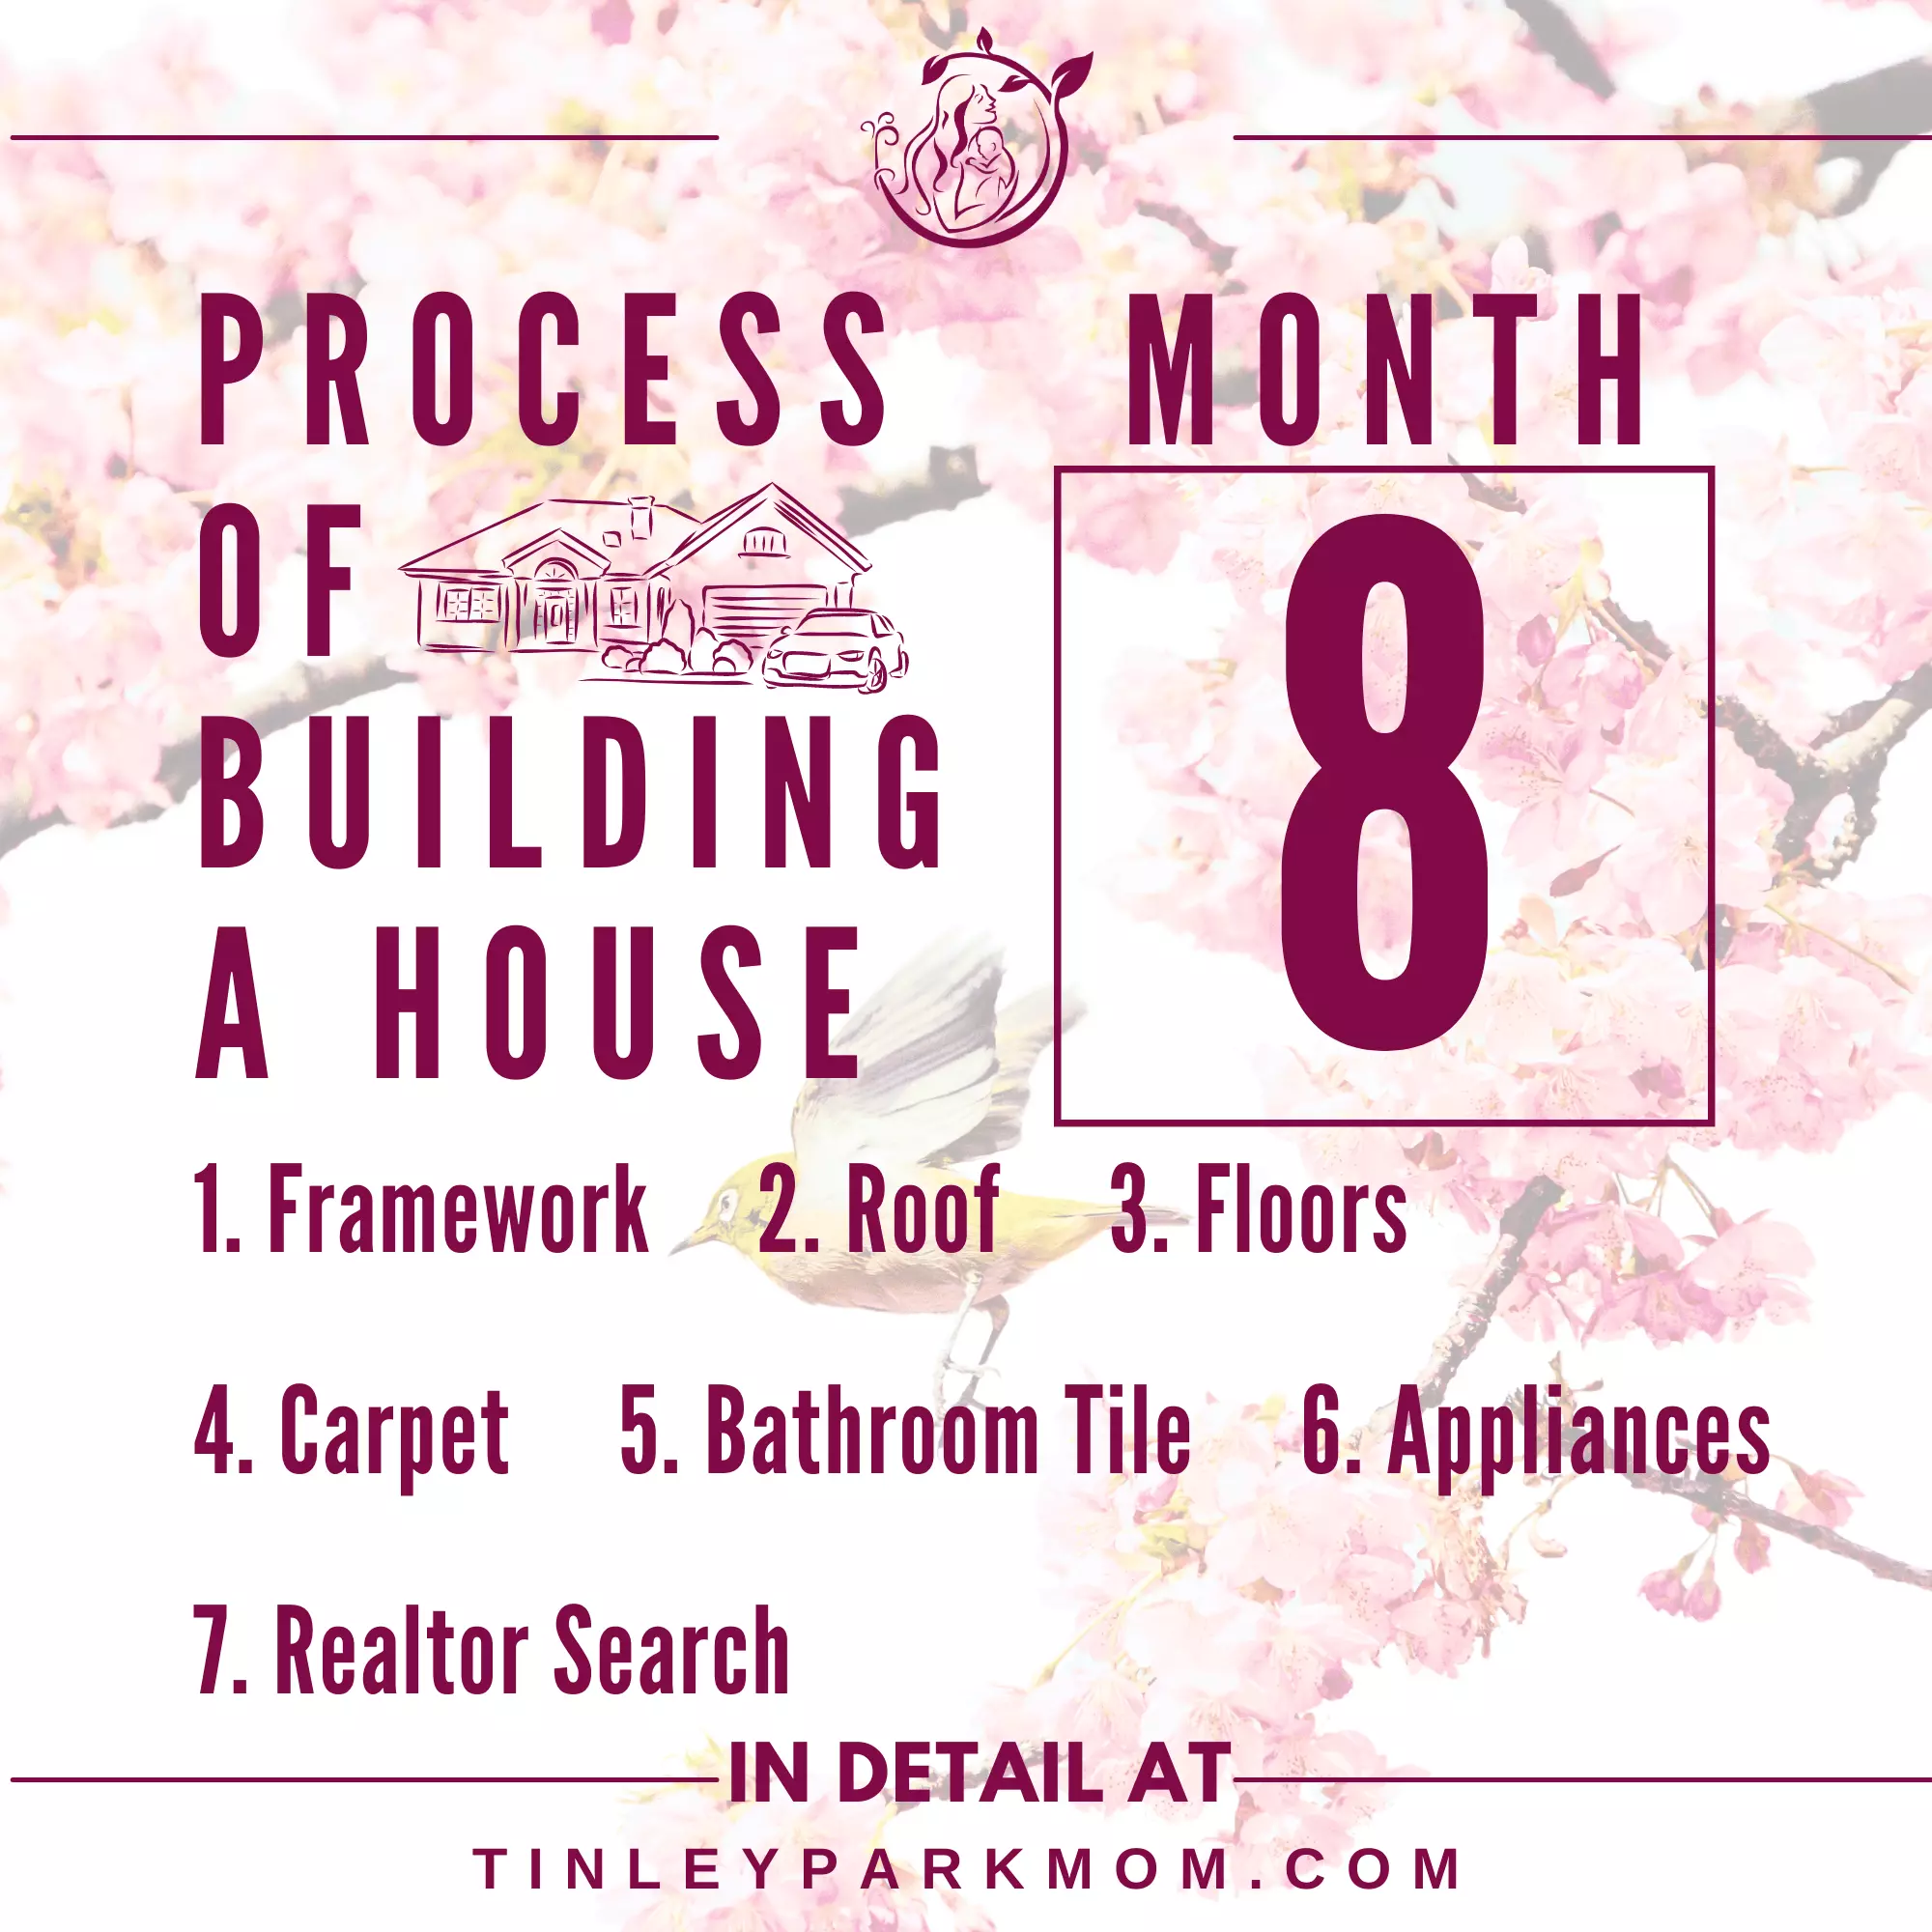 PROCESS OF BUILDING A HOUSE
1. House Framework
2. Roof and Shingles
3. Floors
4. Carpet
5. Bathroom Tile
6. Appliances
7. Realtor Search